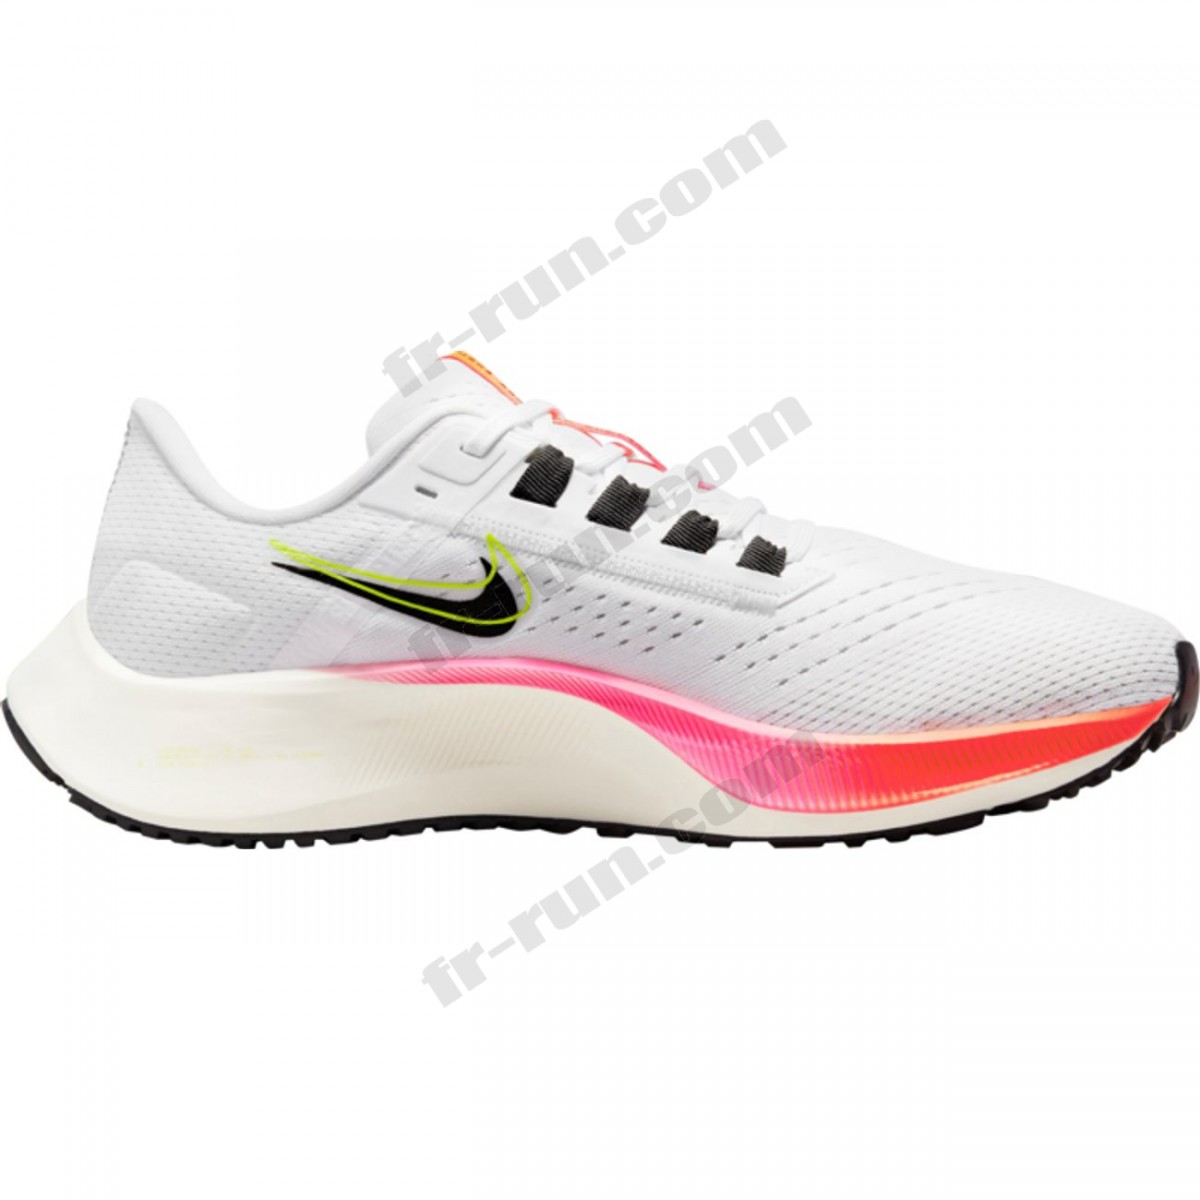 Nike/CHAUSSURES BASSES running femme NIKE W NIKE AIR ZOOM PEGASUS 38 T √ Nouveau style √ Soldes - -1